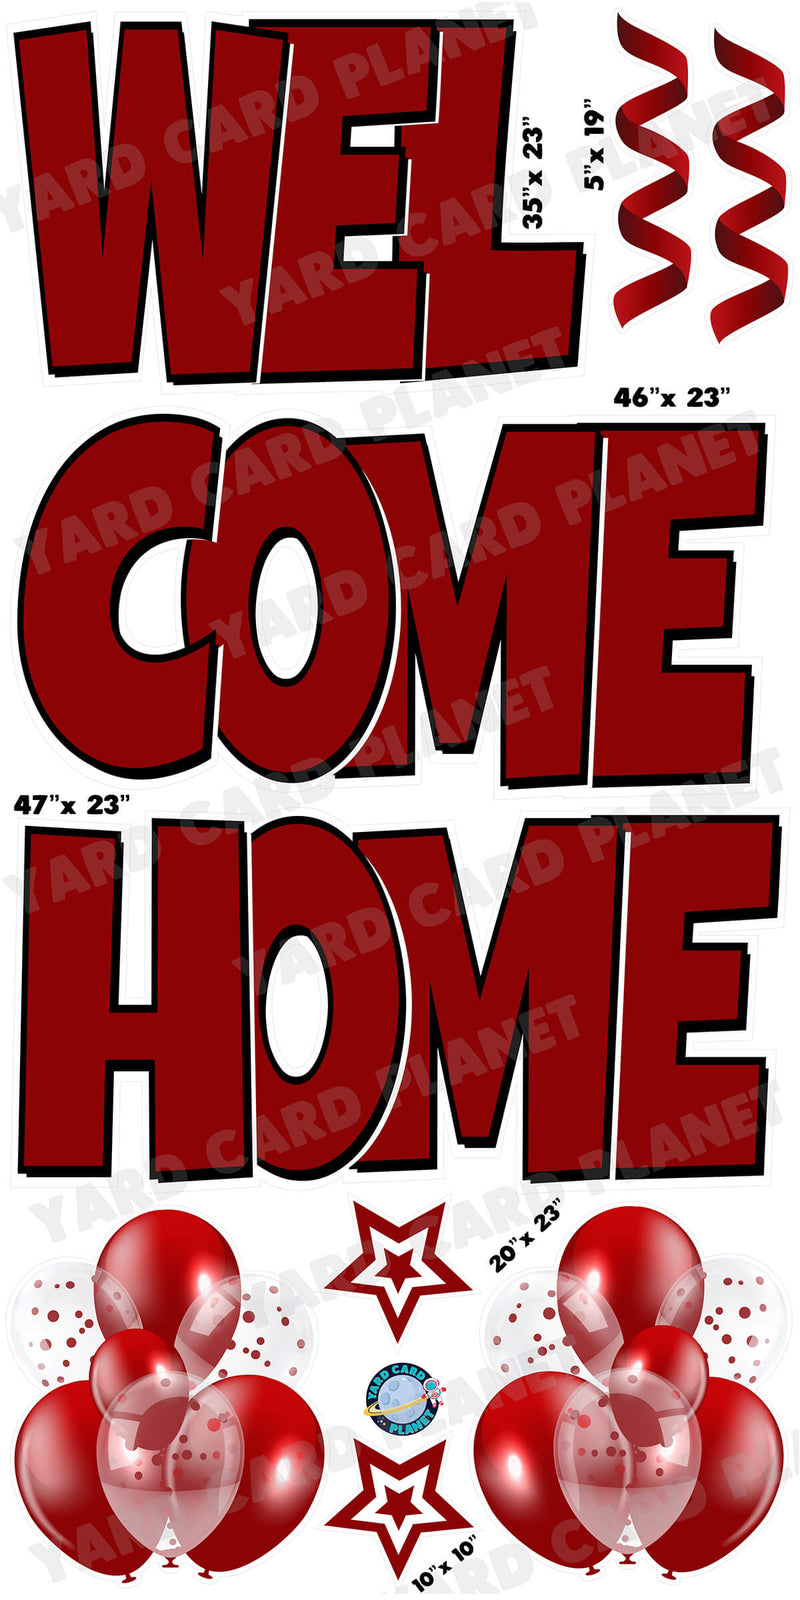 Large 23" Welcome Home Yard Card EZ Quick Sets in Luckiest Guy Font and Flair in Maroon Solid Color